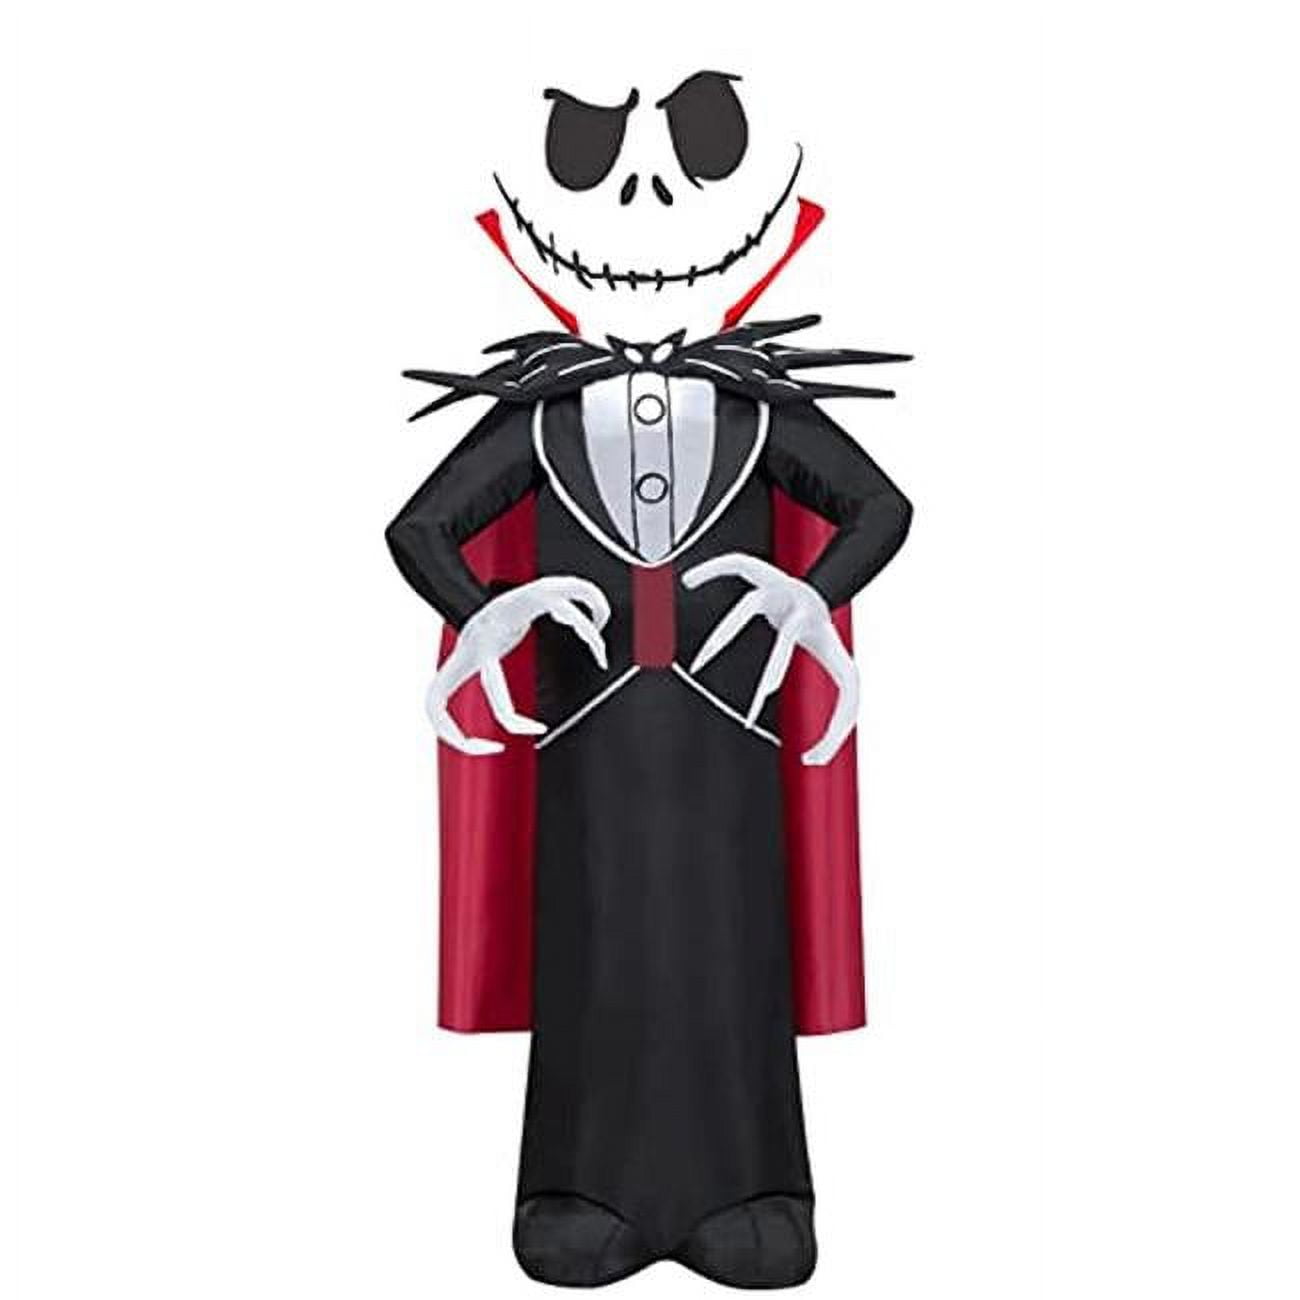 Picture of Airblown Inflatables G08 228880X 42 x 19.7 in. Airblown Jack Skellington as Vampire Christmas Decoration - Multi Color